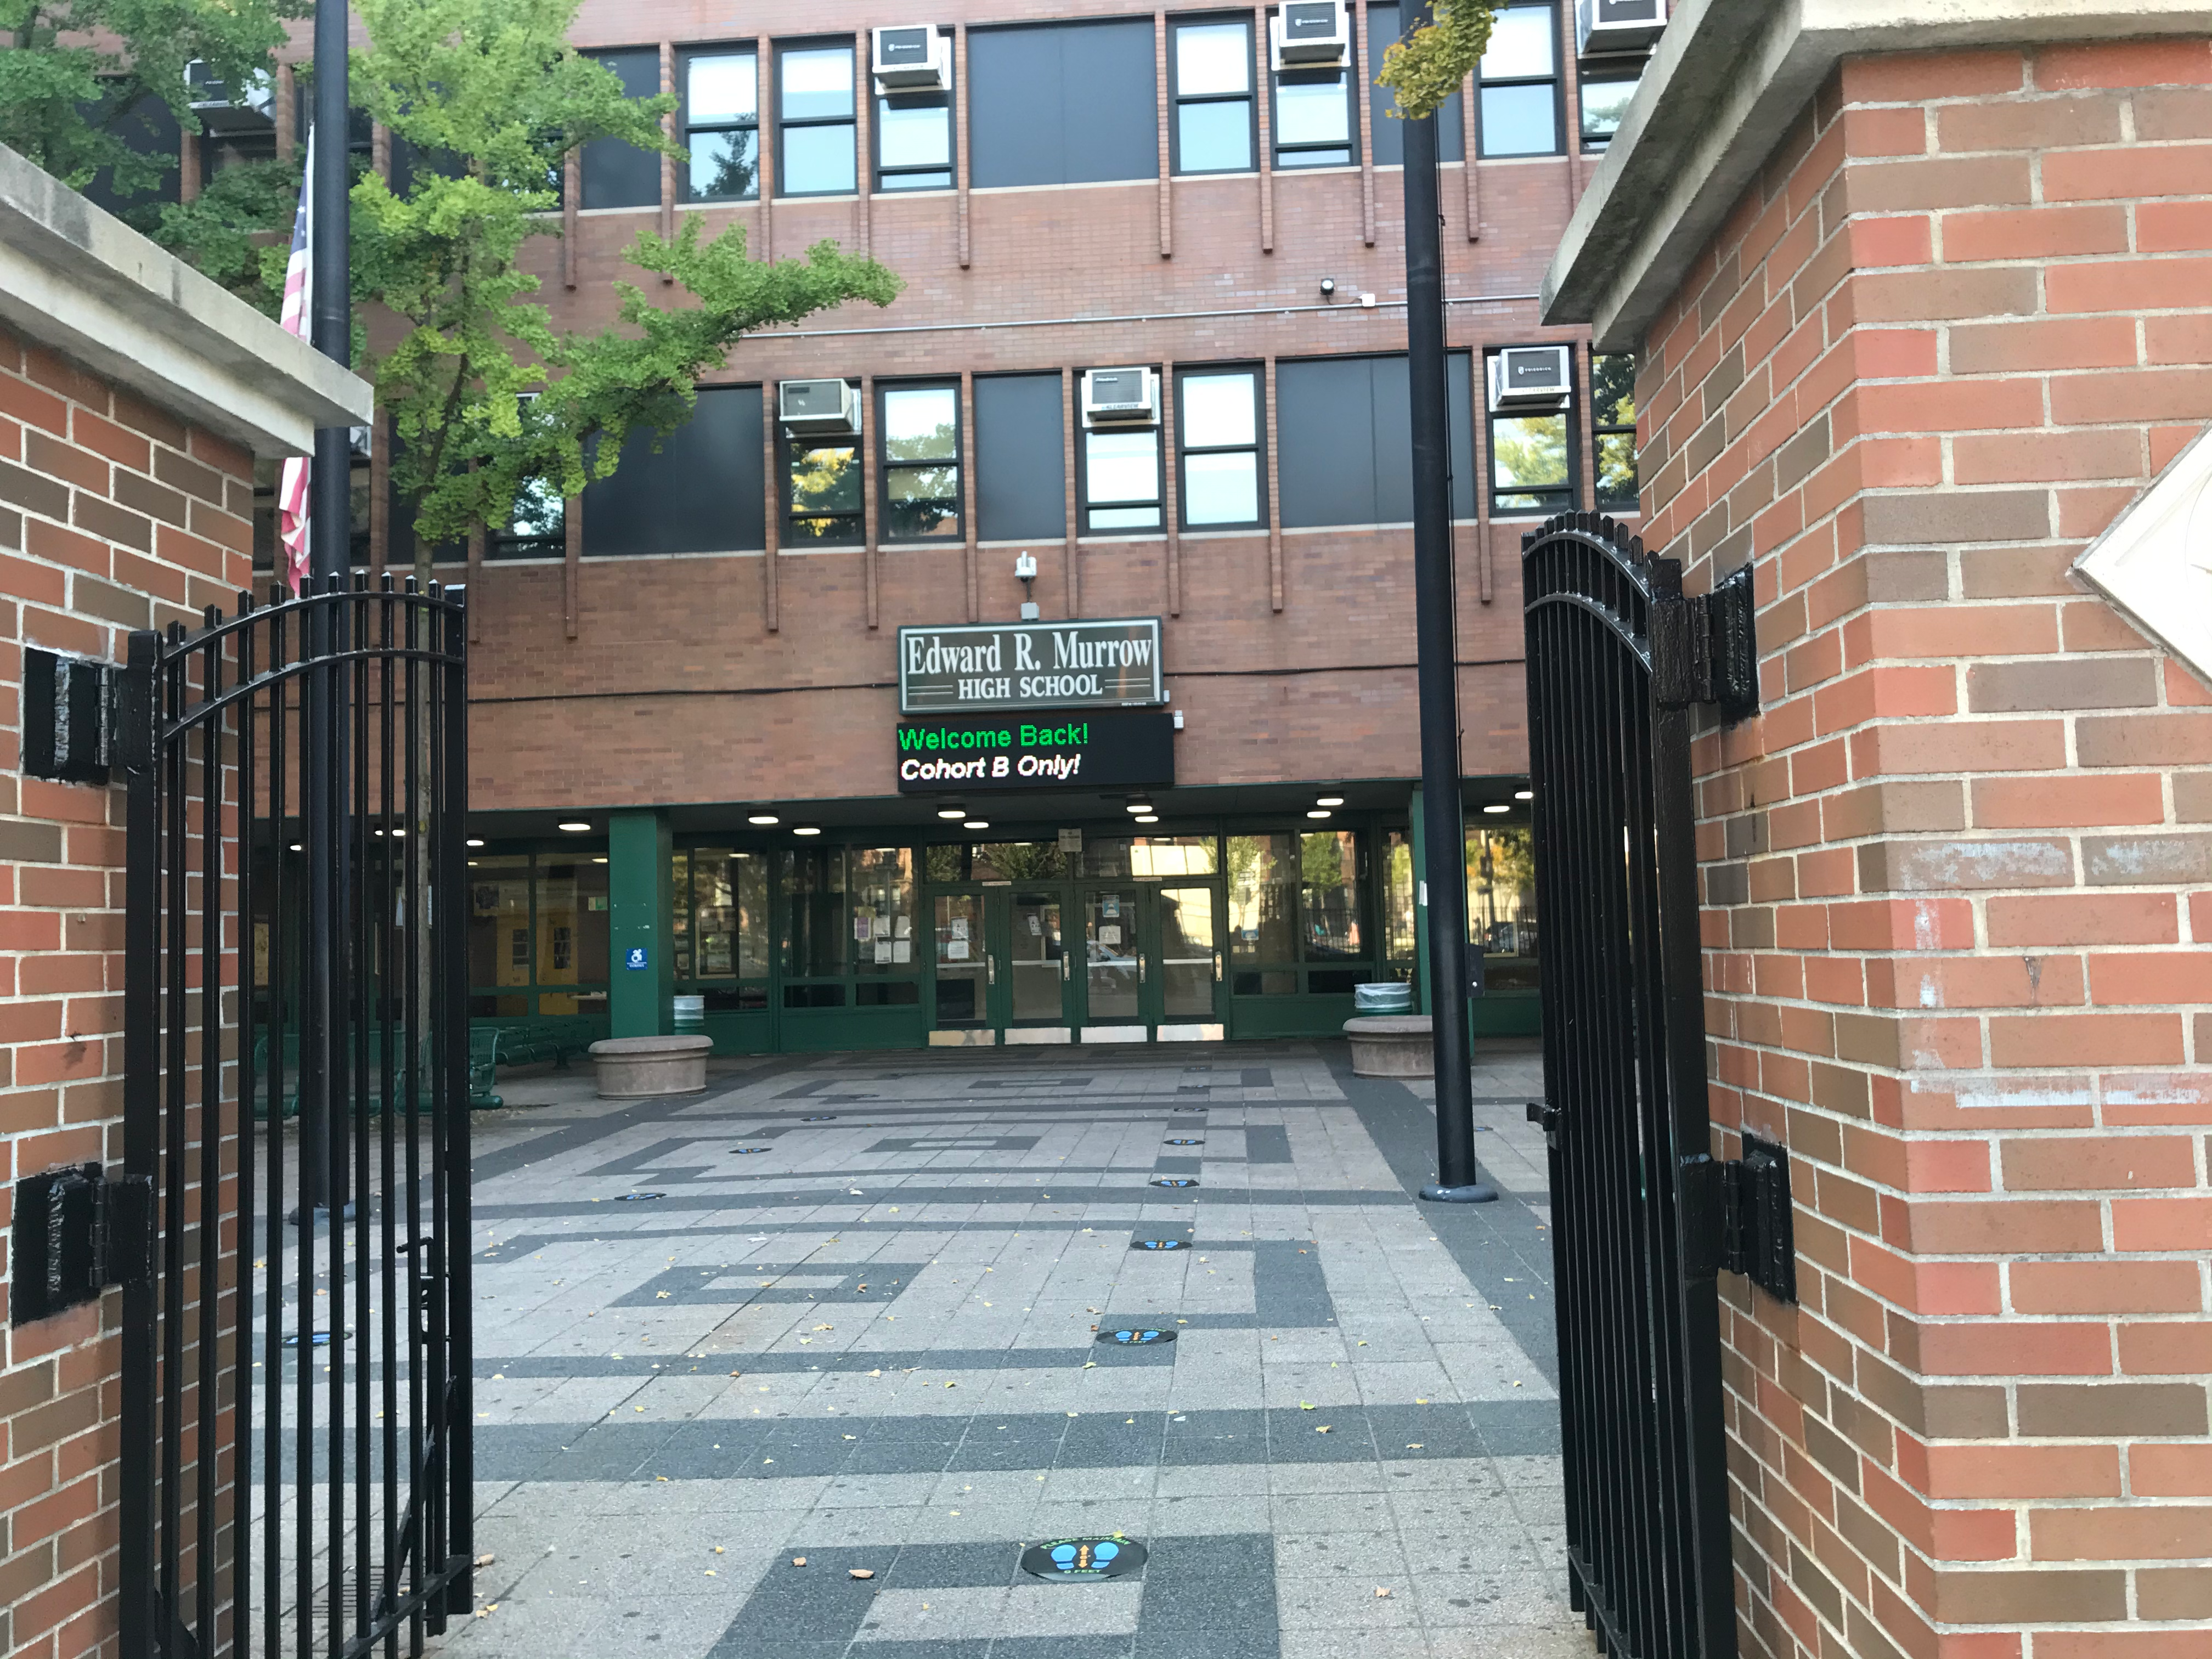 Edward R. Murrow High School in Brooklyn after it closed to in-person learning just days after the start of school, October 6, 2020.